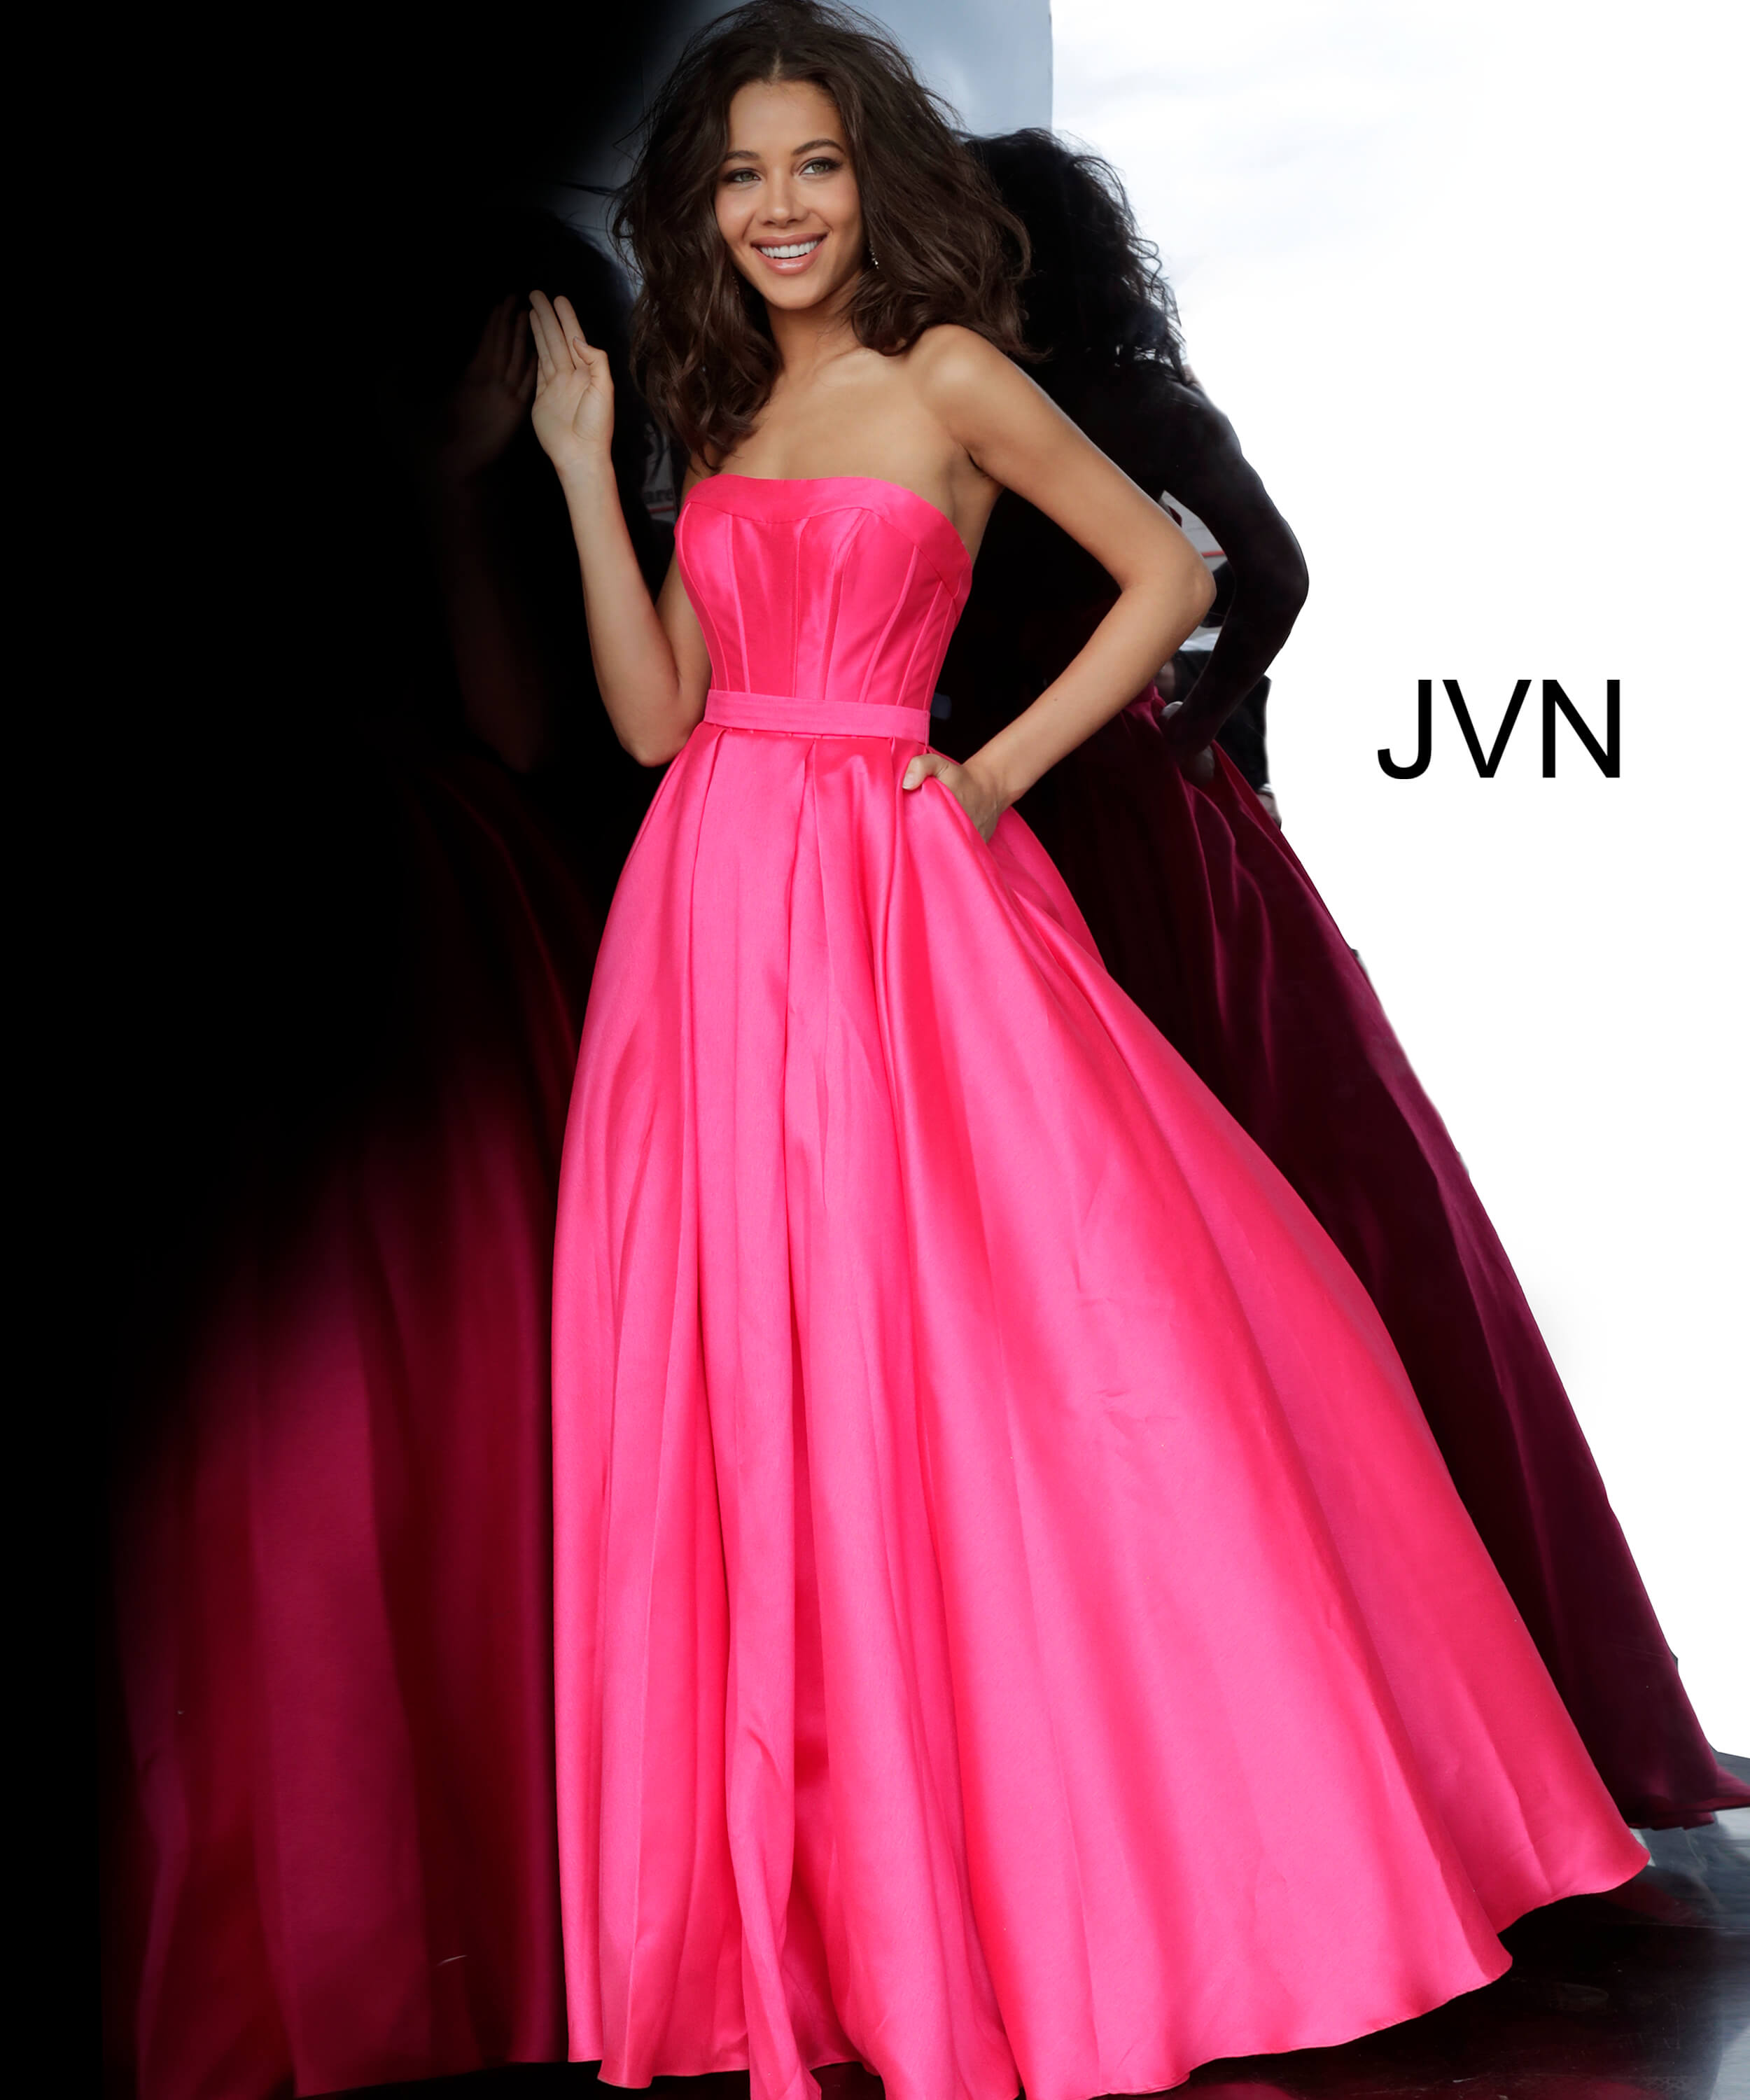 hot pink ball gown dresses